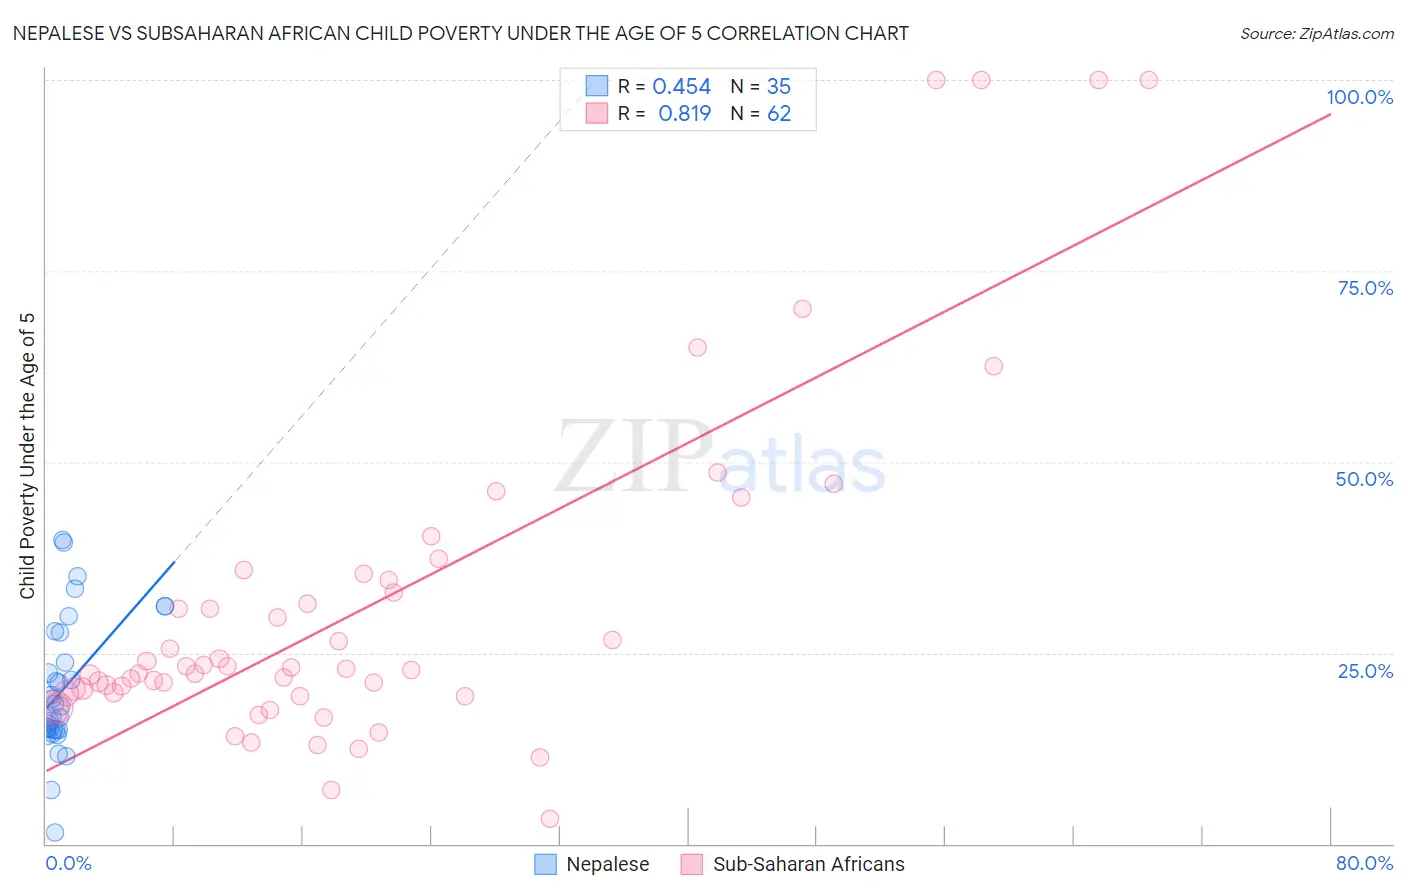 Nepalese vs Subsaharan African Child Poverty Under the Age of 5